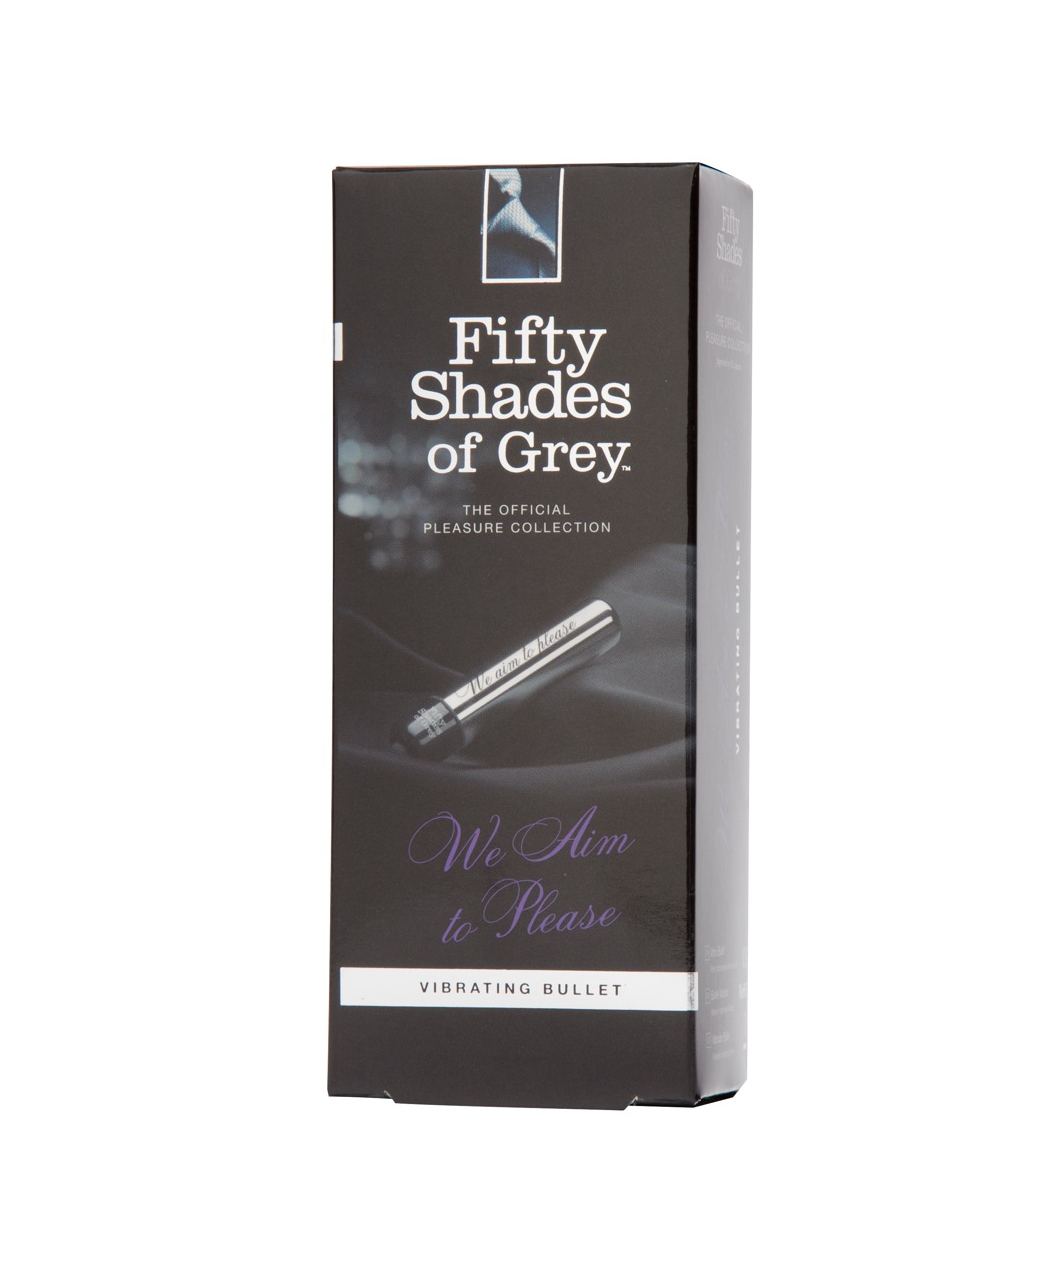 Fifty Shades of Grey We Aim to Please